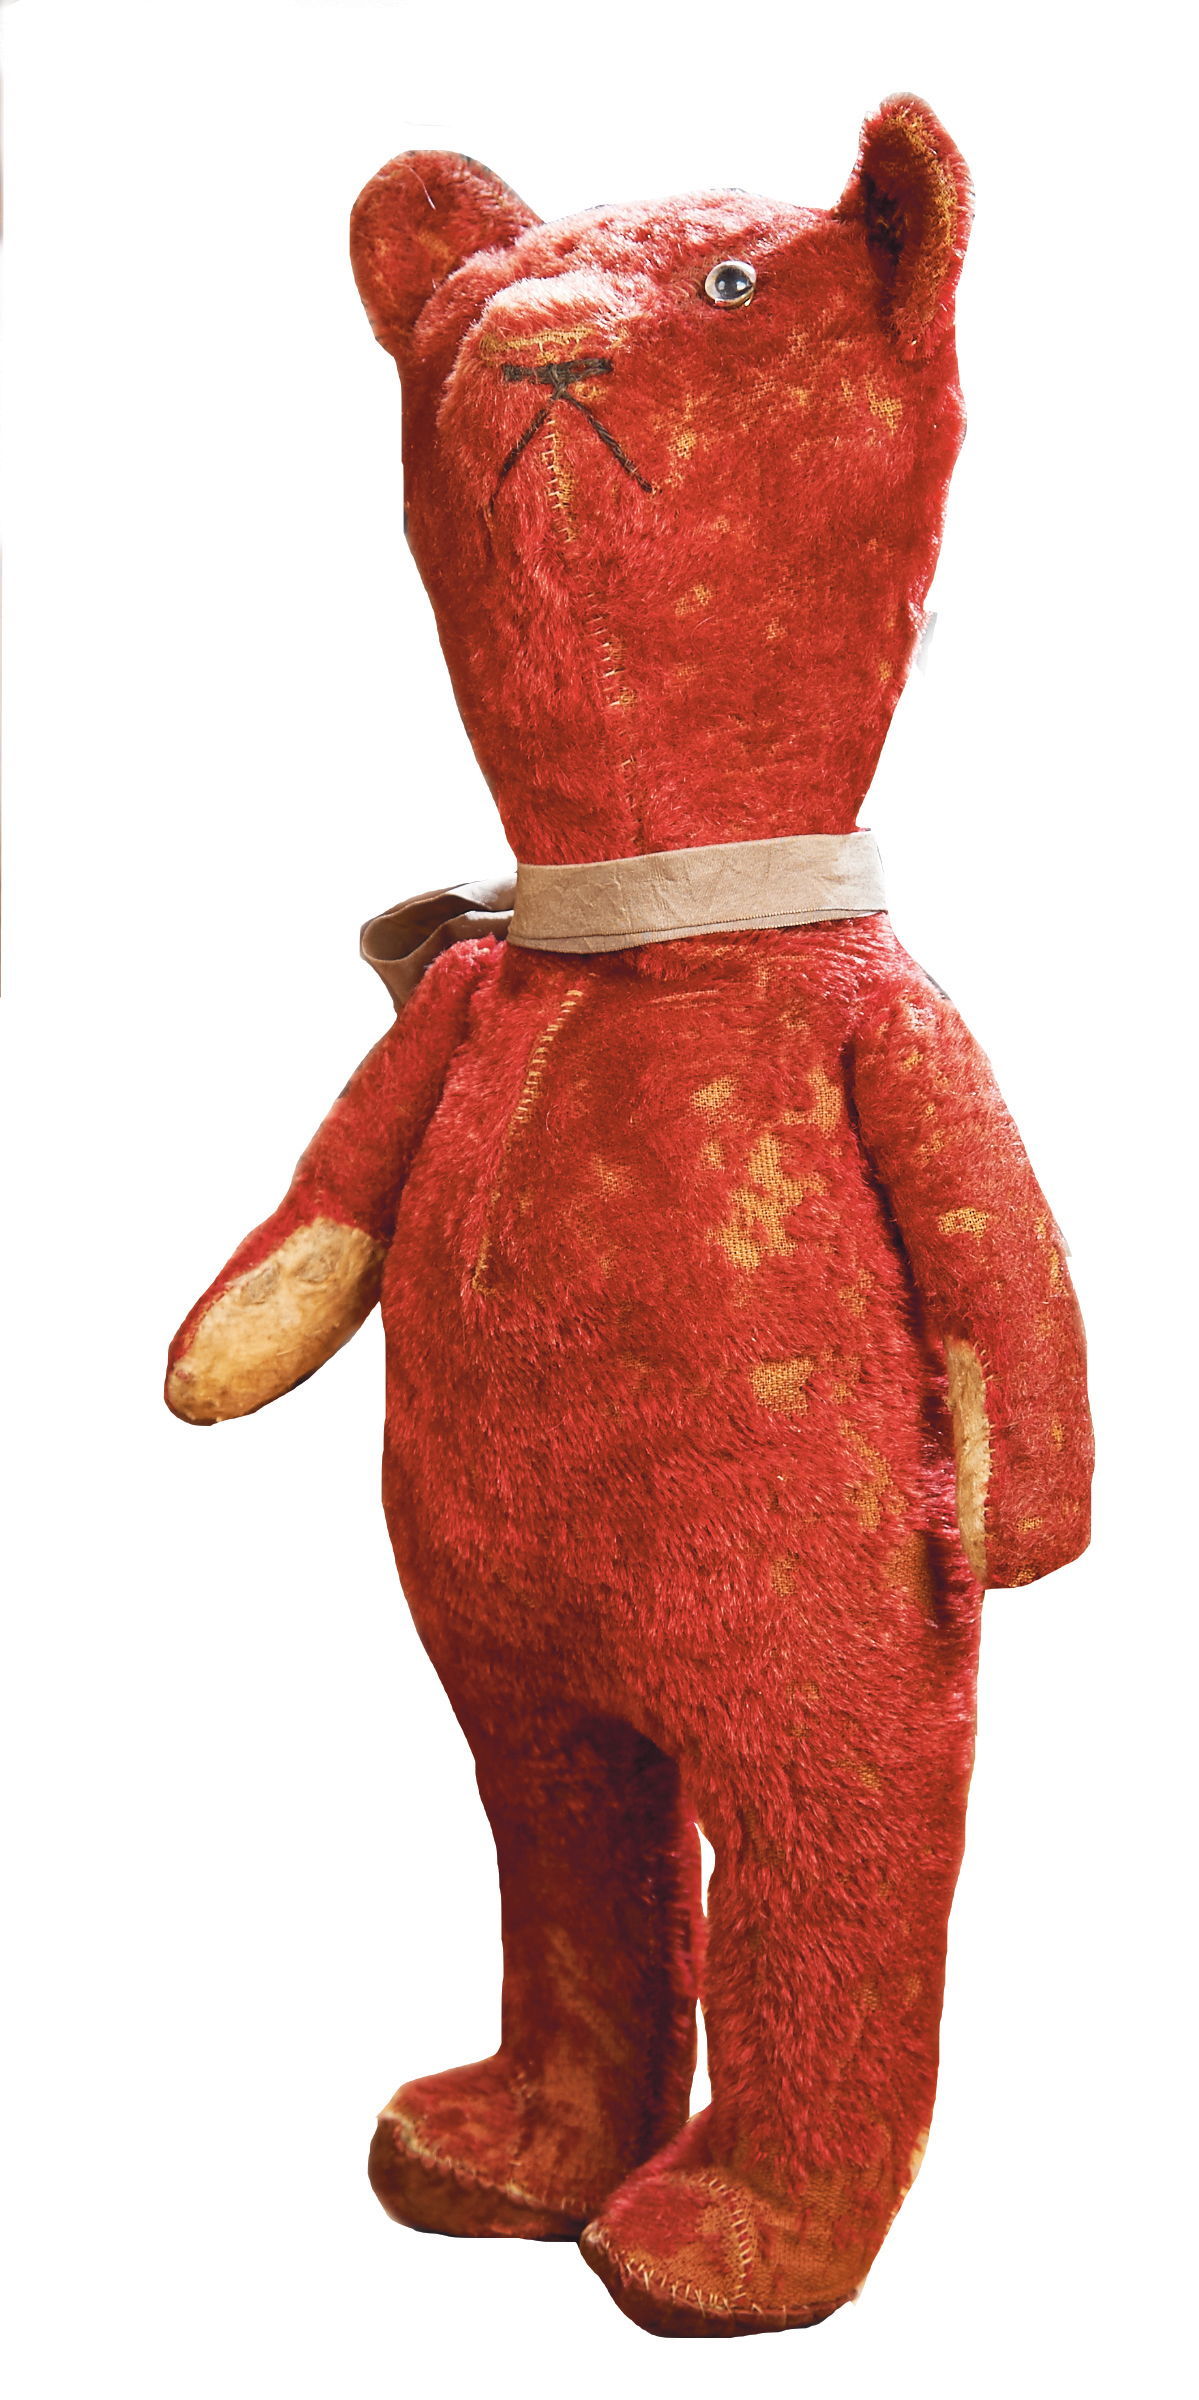 This 22-inch-tall red Teddy bear was sold at a Theriault auction for $448 in 2014. The vintage bear has small electric bulbs for eyes that no longer work.